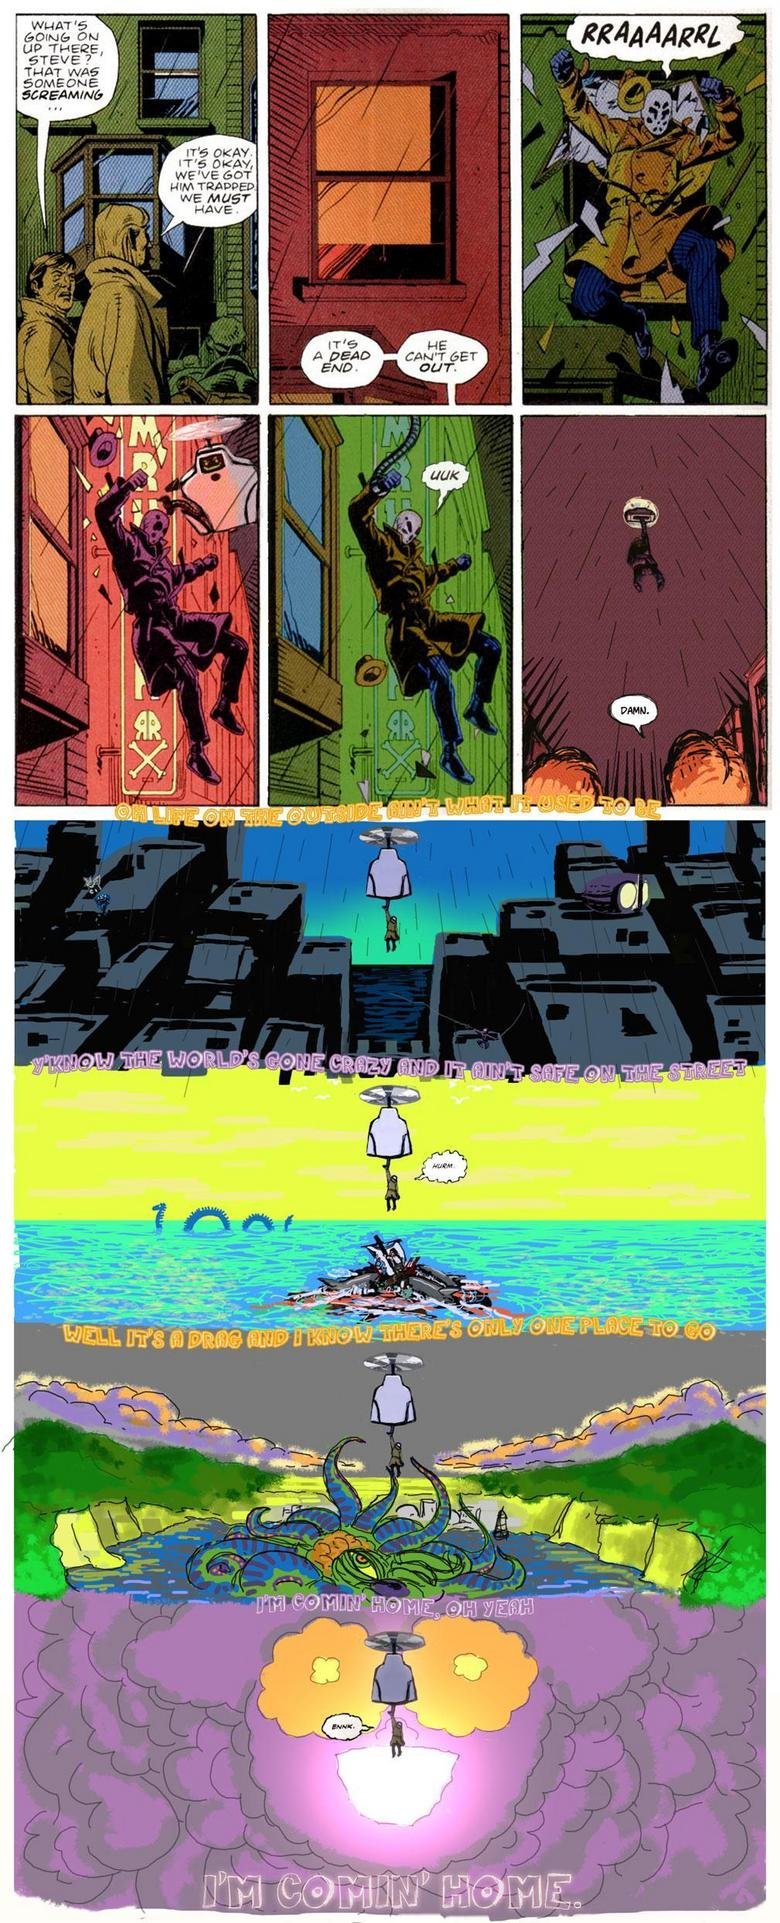 How Watchmen should of Ended. My friend showed me this, so yeah YEAH SUPERJAIL. THAT WAS so/ we ON E. I love that show! thumb for you!!